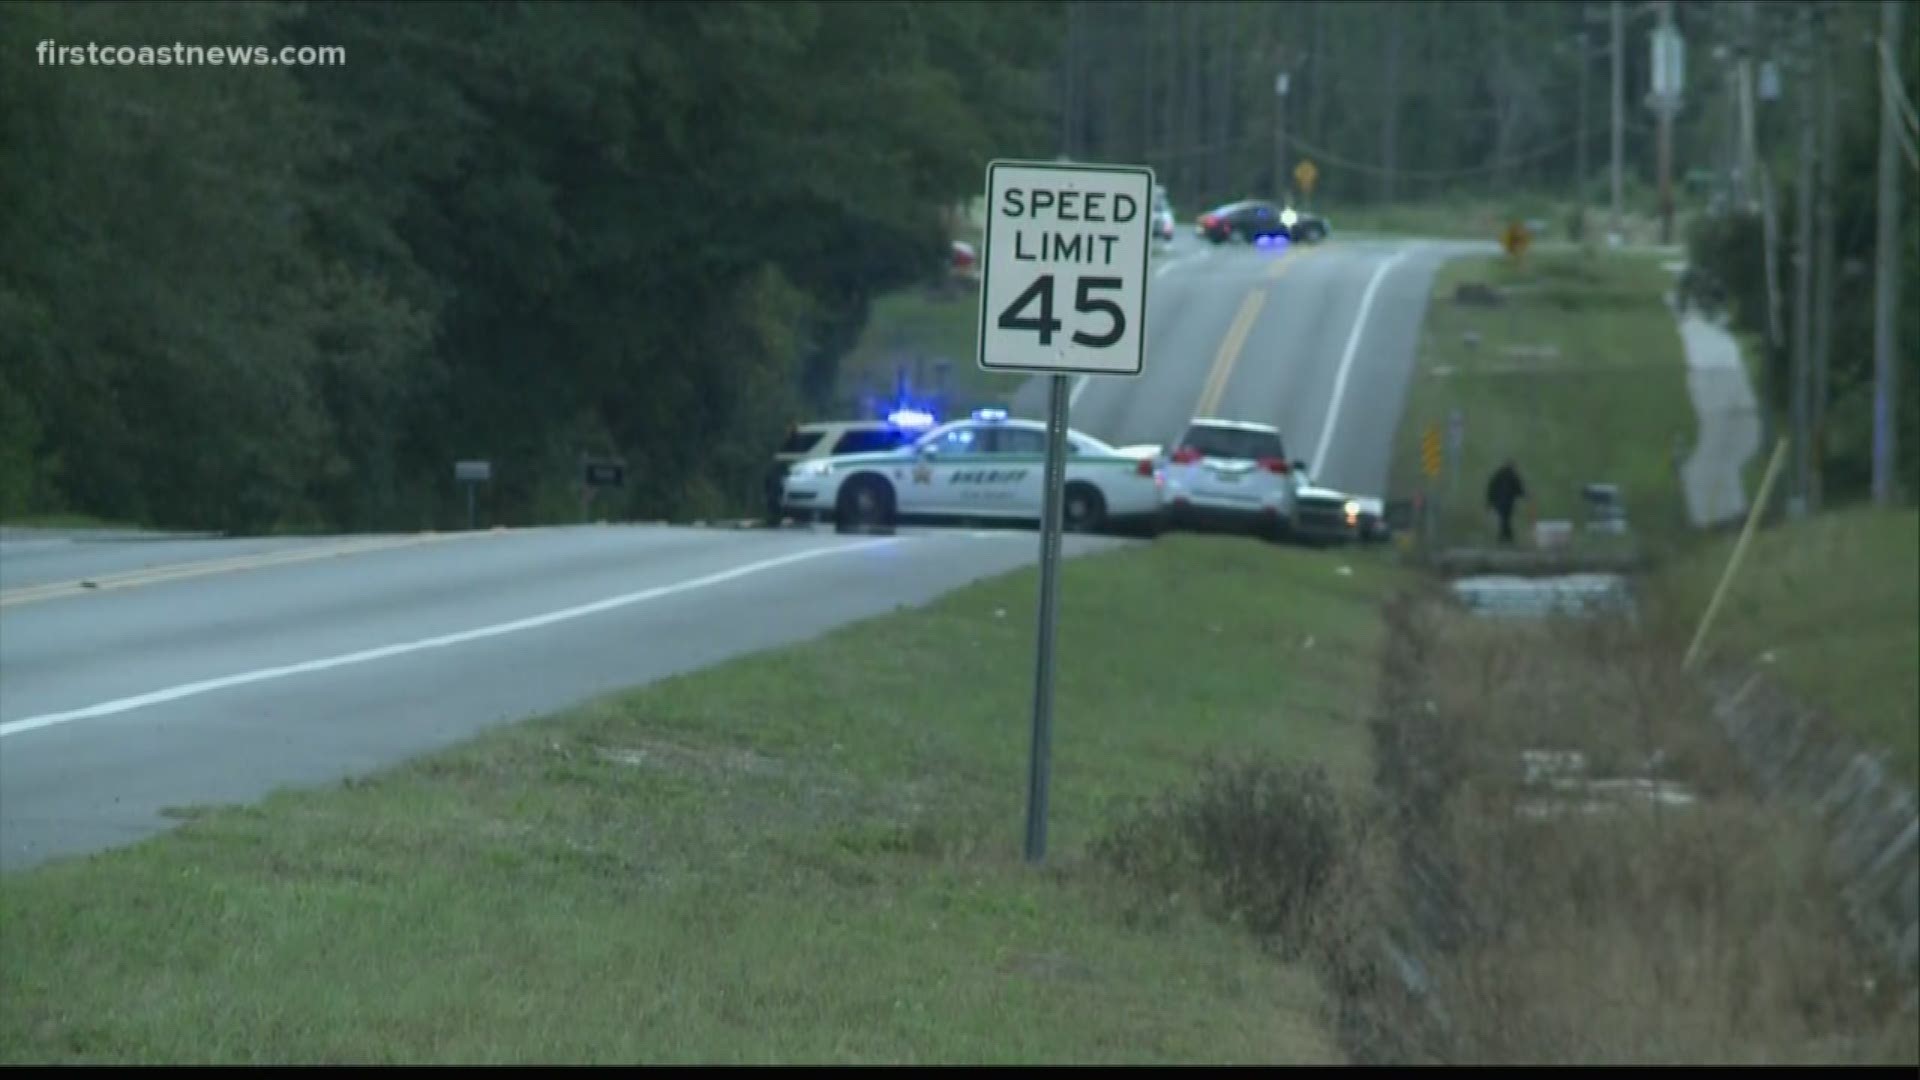 Roads were blocked from Mallard Road to Carter Spencer Road until 10:45 a.m., the Clay County Sheriff's tweeted.